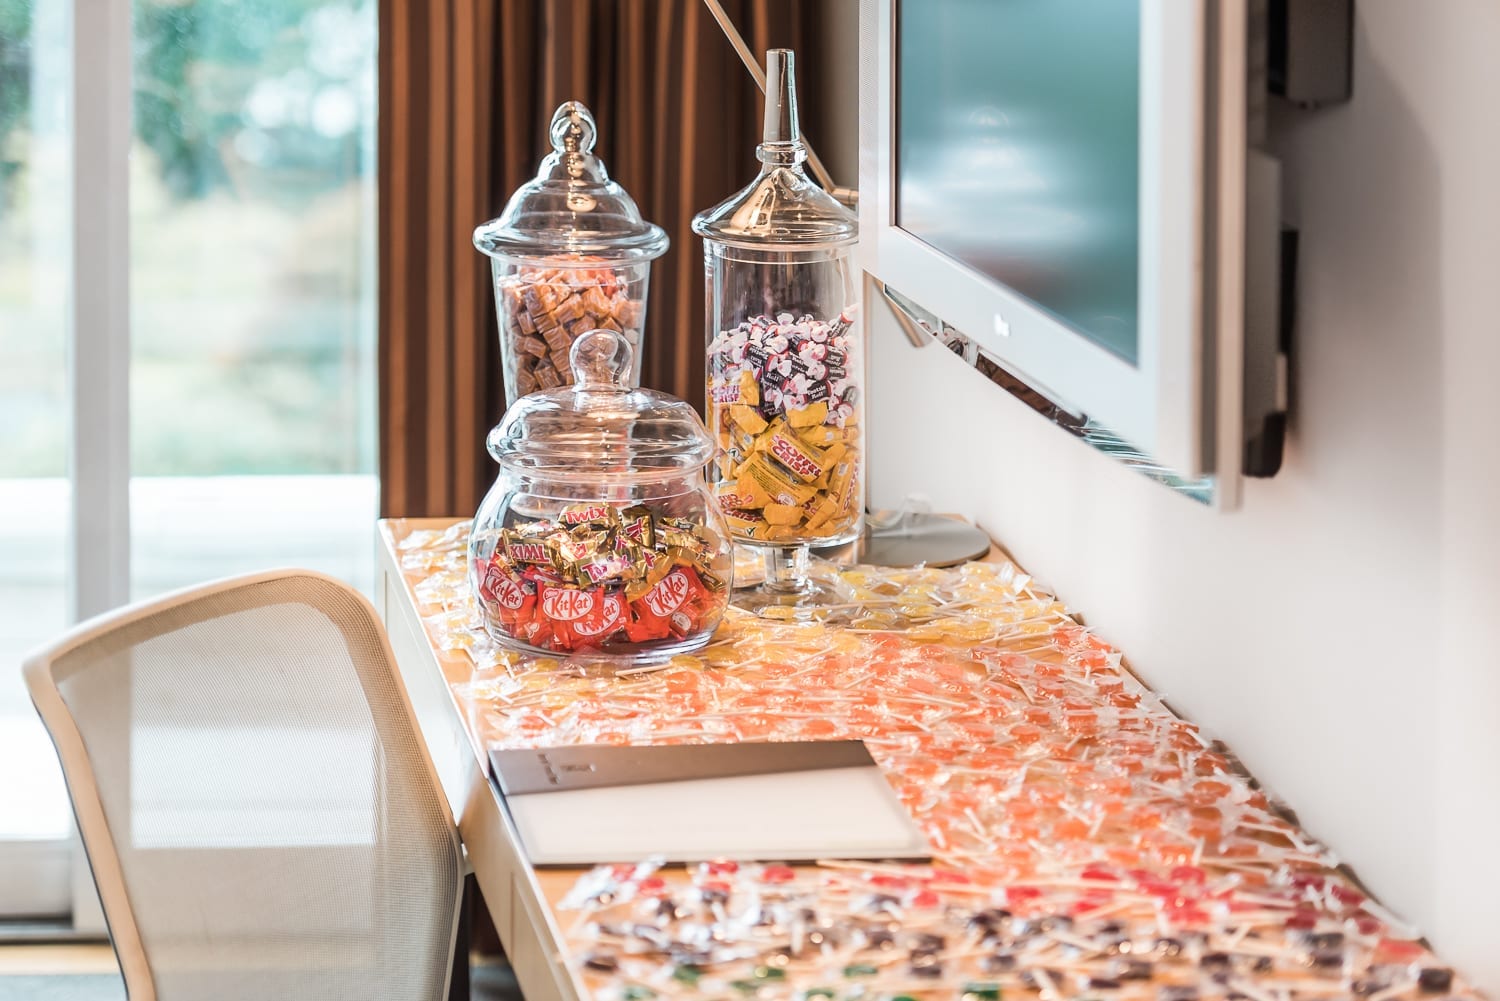 Experience a bonafide Halloween sugar rush in the candy-filled Treat Suite. Photo ItkasanImages for Inn at Laurel Point.